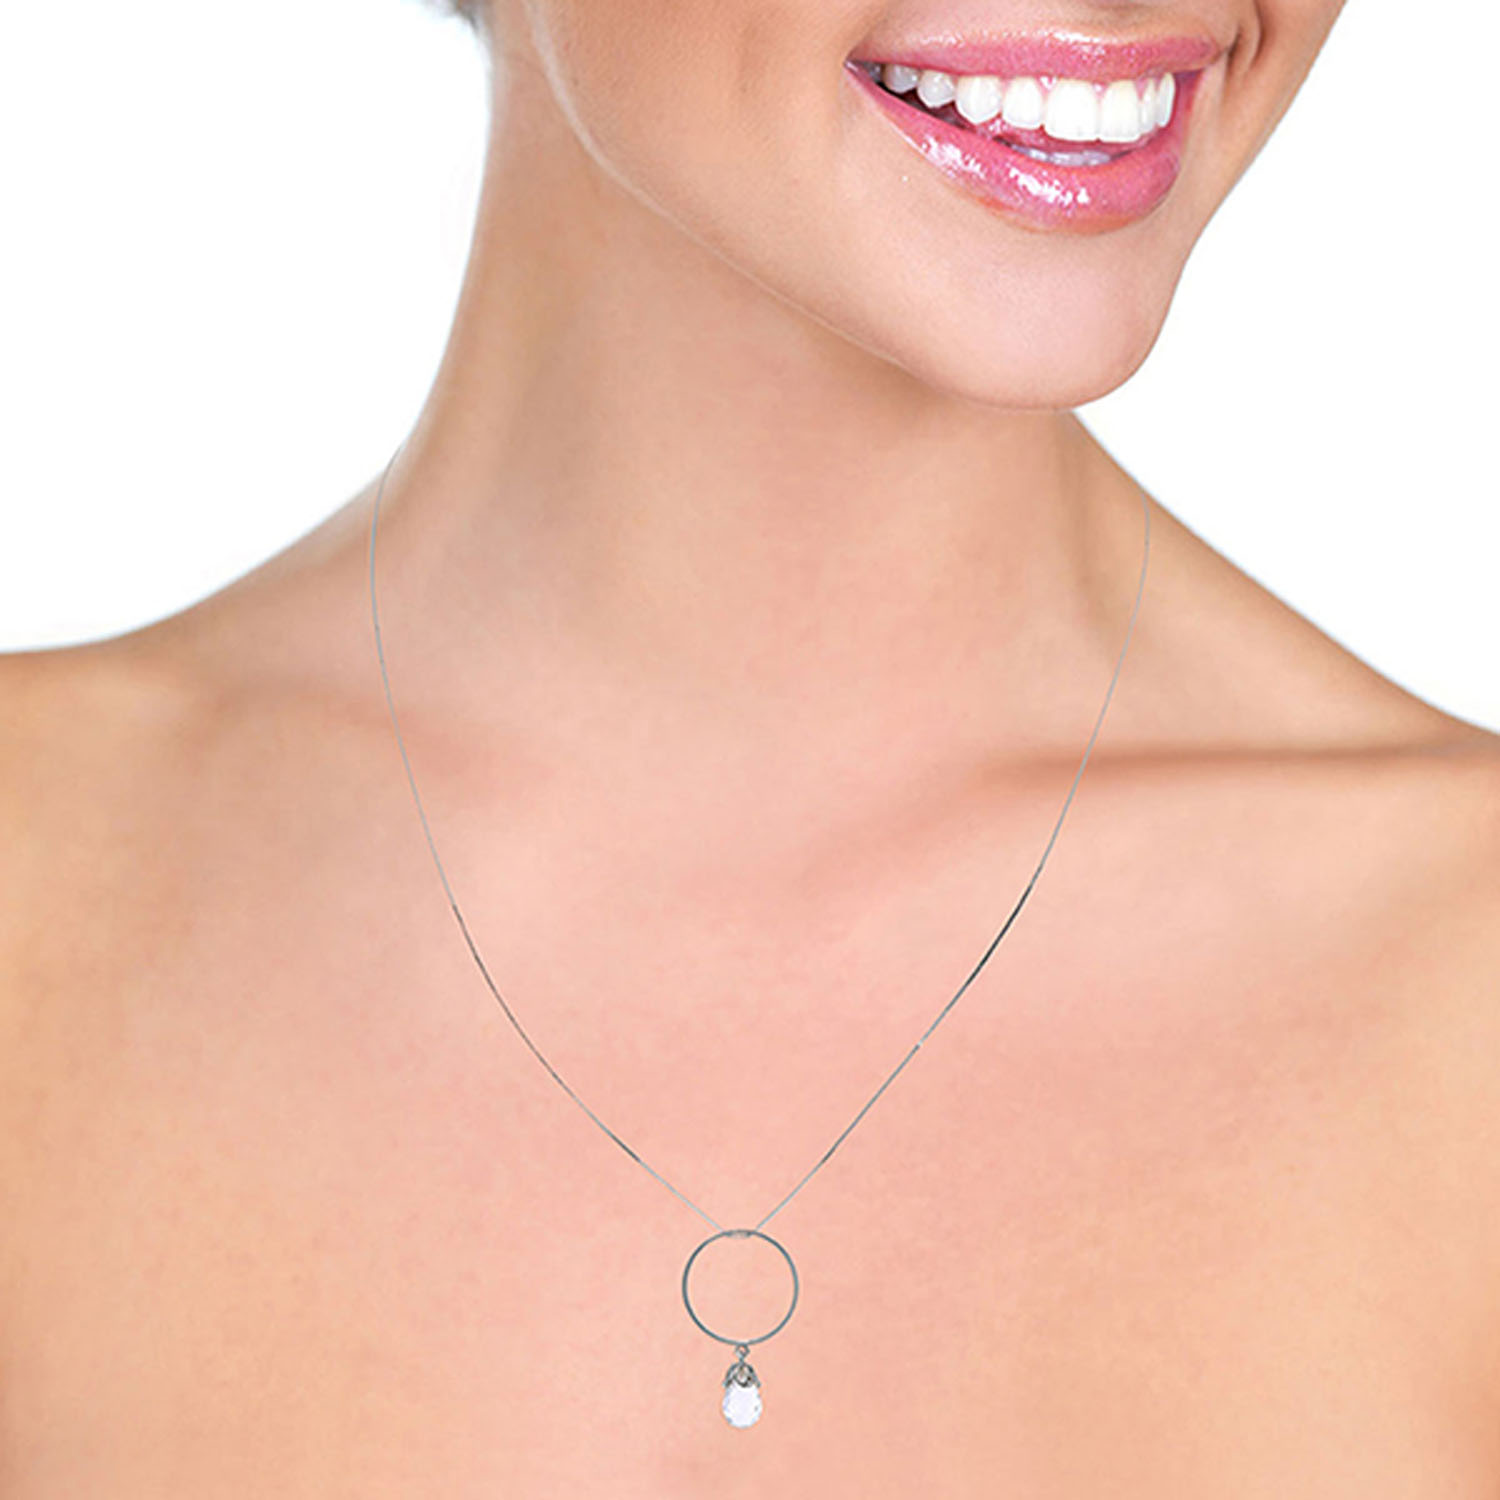 Galaxy Gold 3 Carat 14k 18" Solid White Gold Necklace with Natural White Topaz Charm Circle Pendant - image 2 of 2